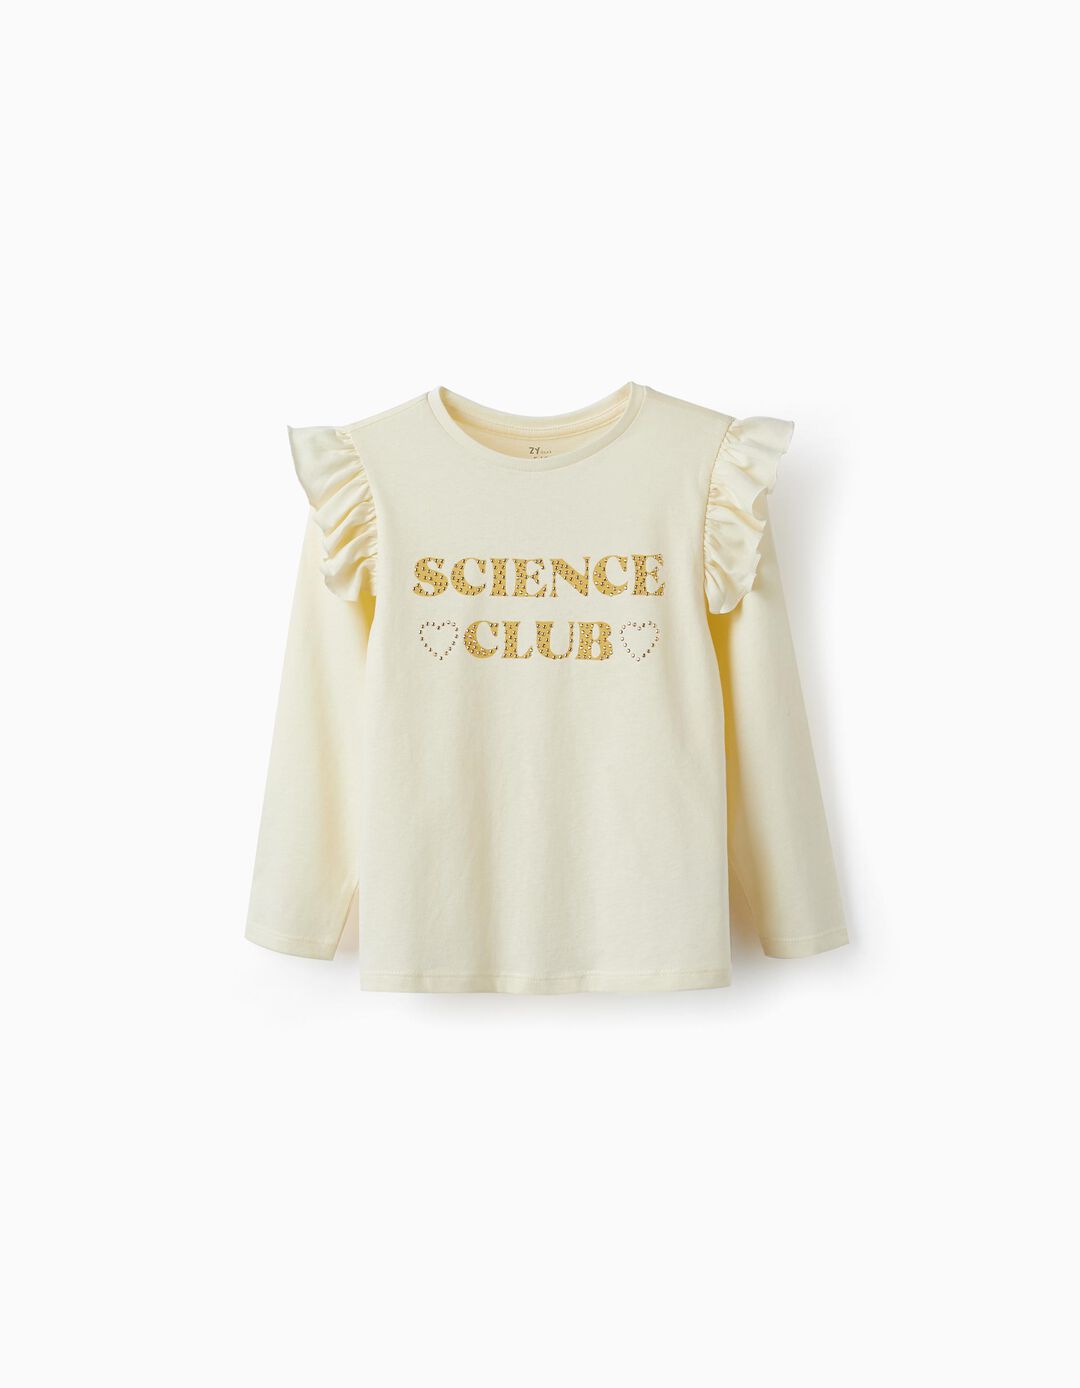 Cotton T-Shirt for Girls 'Science Club', White